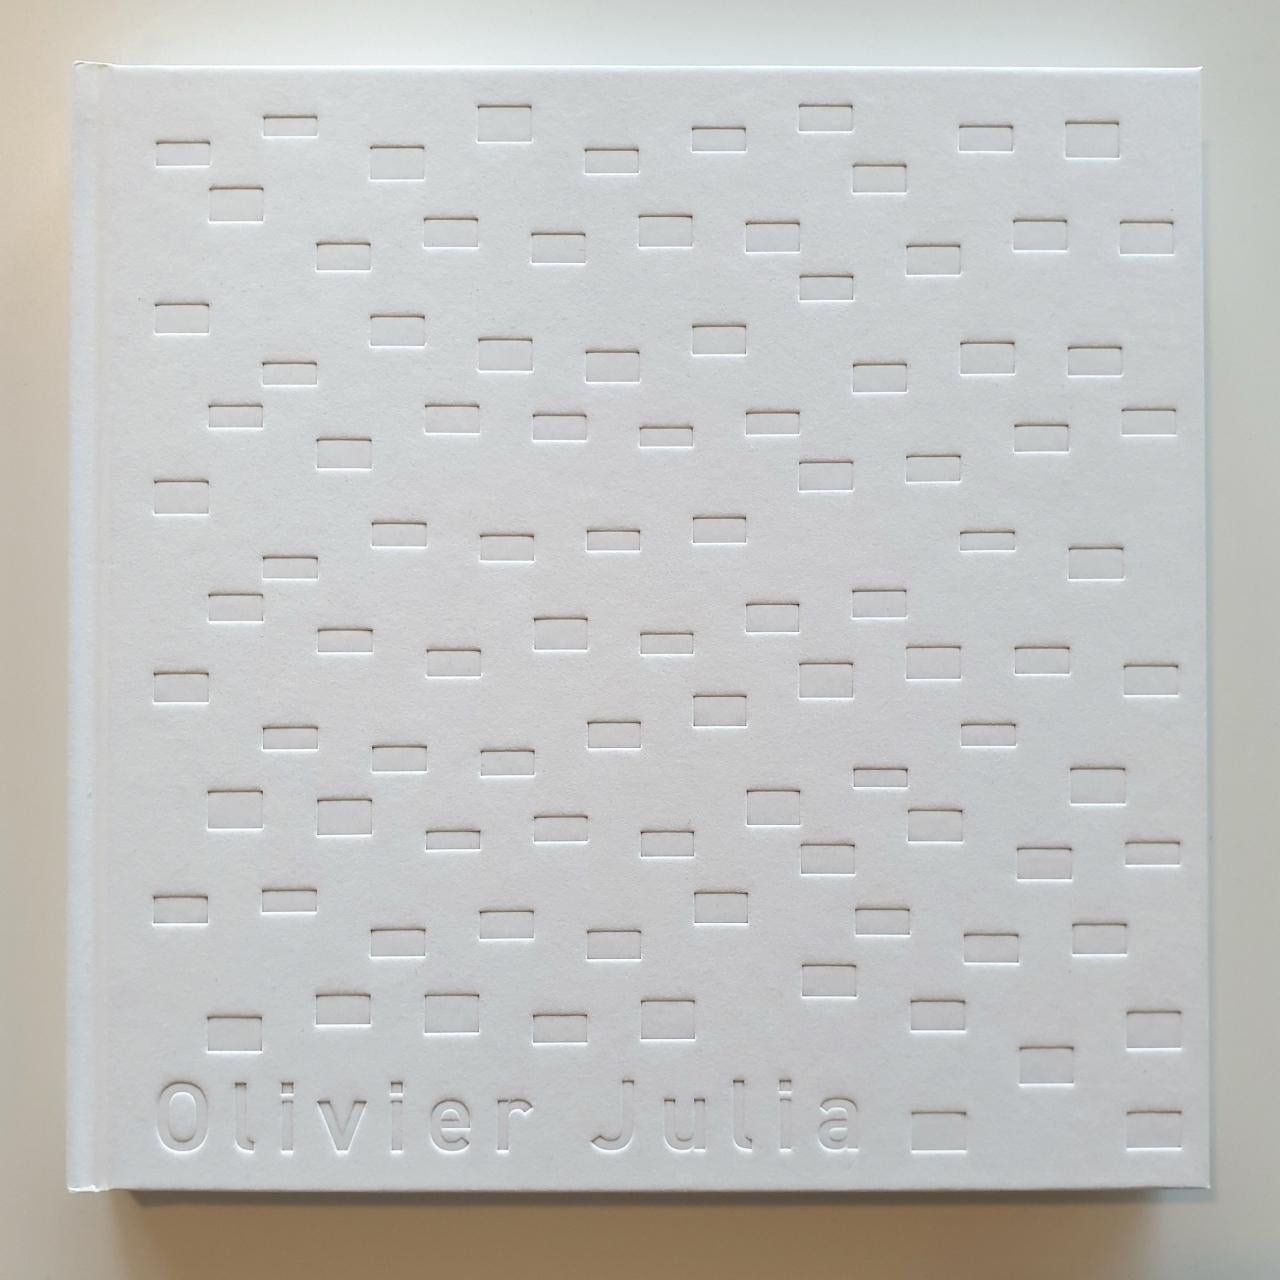 Confusion ritmique III no. 10/10 is one of a series of three different medium size contemporary modern sculpture painting relief by French-Dutch artist Olivier Julia. The relief is made from wood and finished with a mixture of anthracite grey and